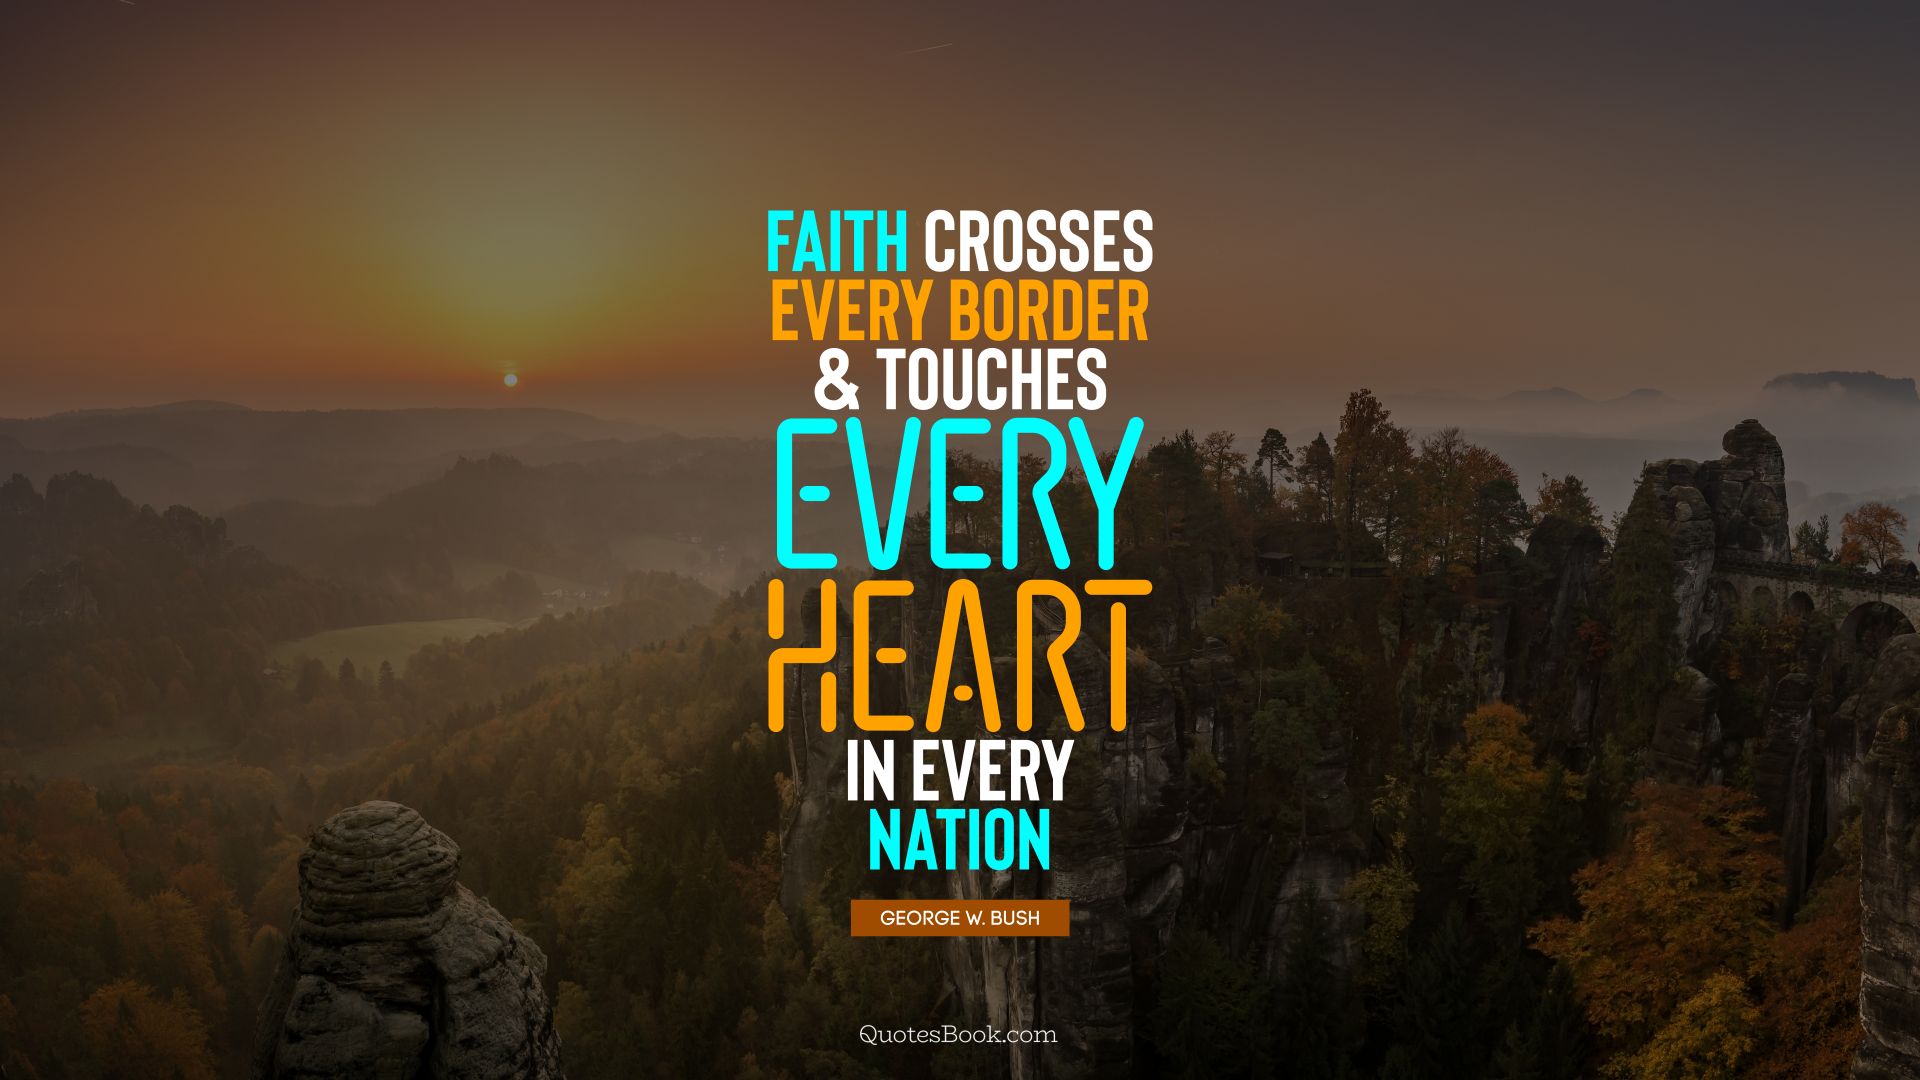 Faith crosses every border and touches every heart in every nation. - Quote by George W. Bush